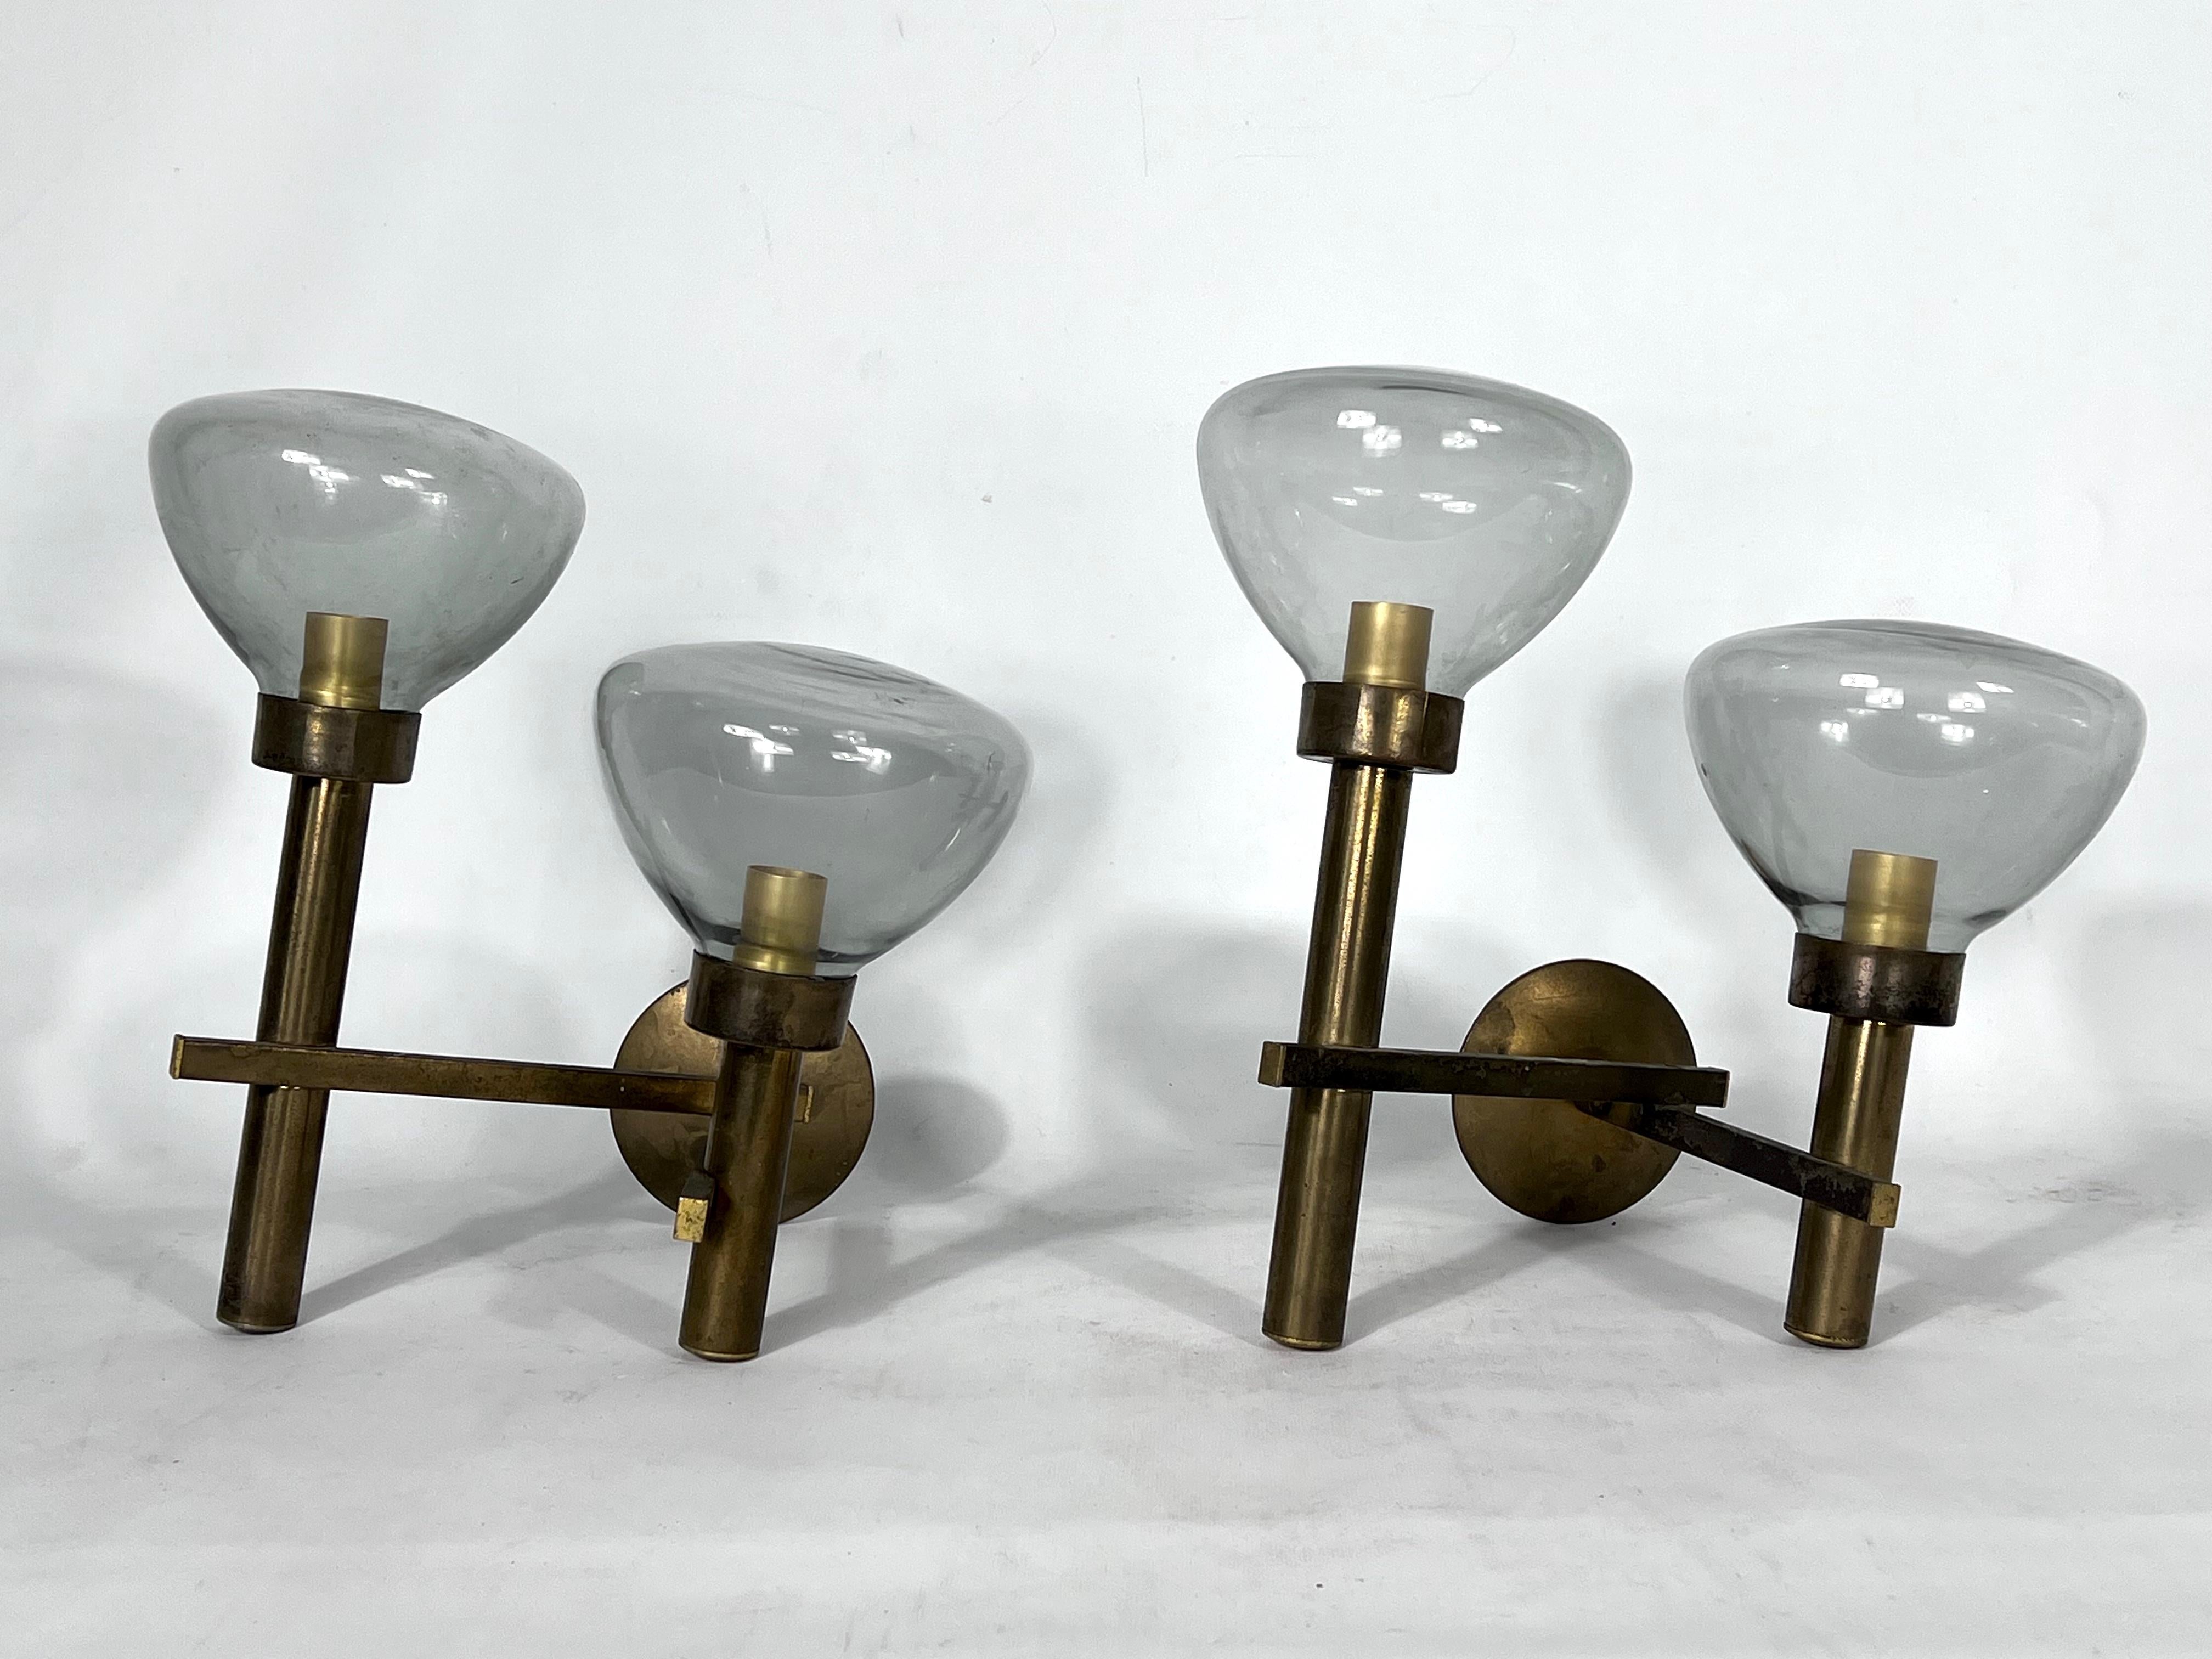 Produced by Sciolari during the 70s. Set of two large sconces made of brass and transparent grey glasses from Murano. Good vintage conditions with new wiring. Brass with original patina and trace of use and age. Each sconce mounts two sockets for